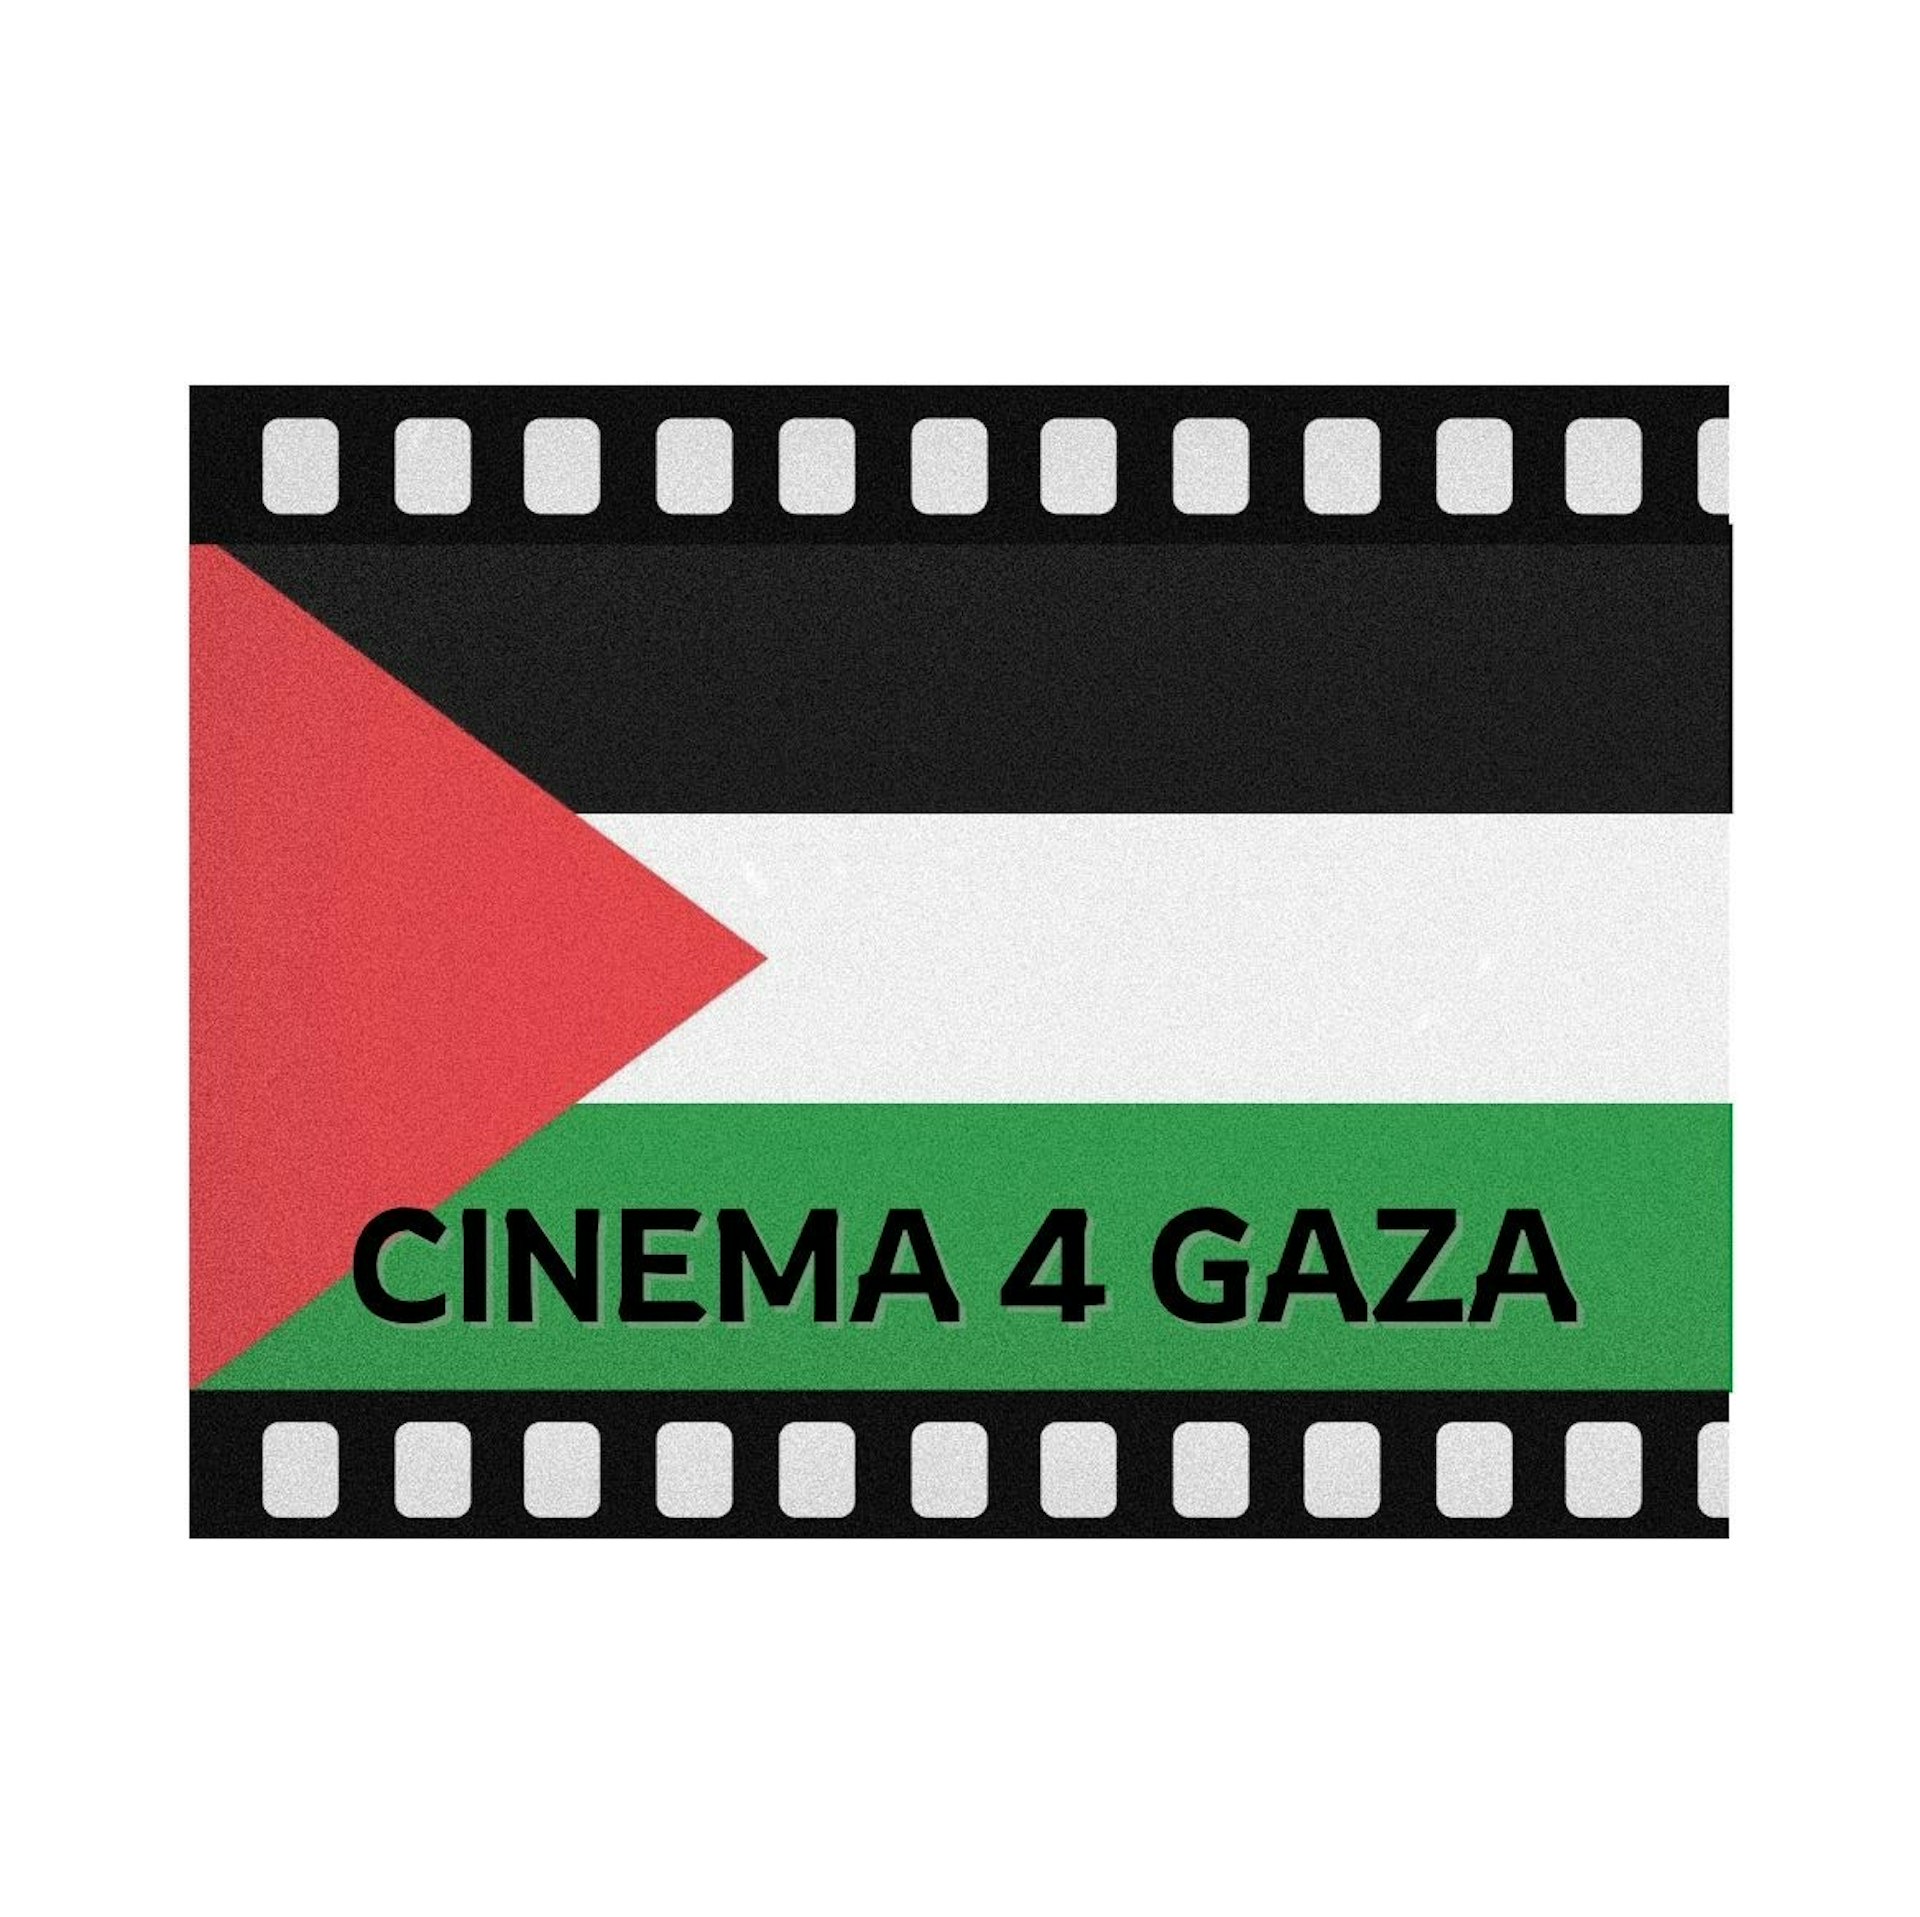 Stars of stage and screen unite for Palestine